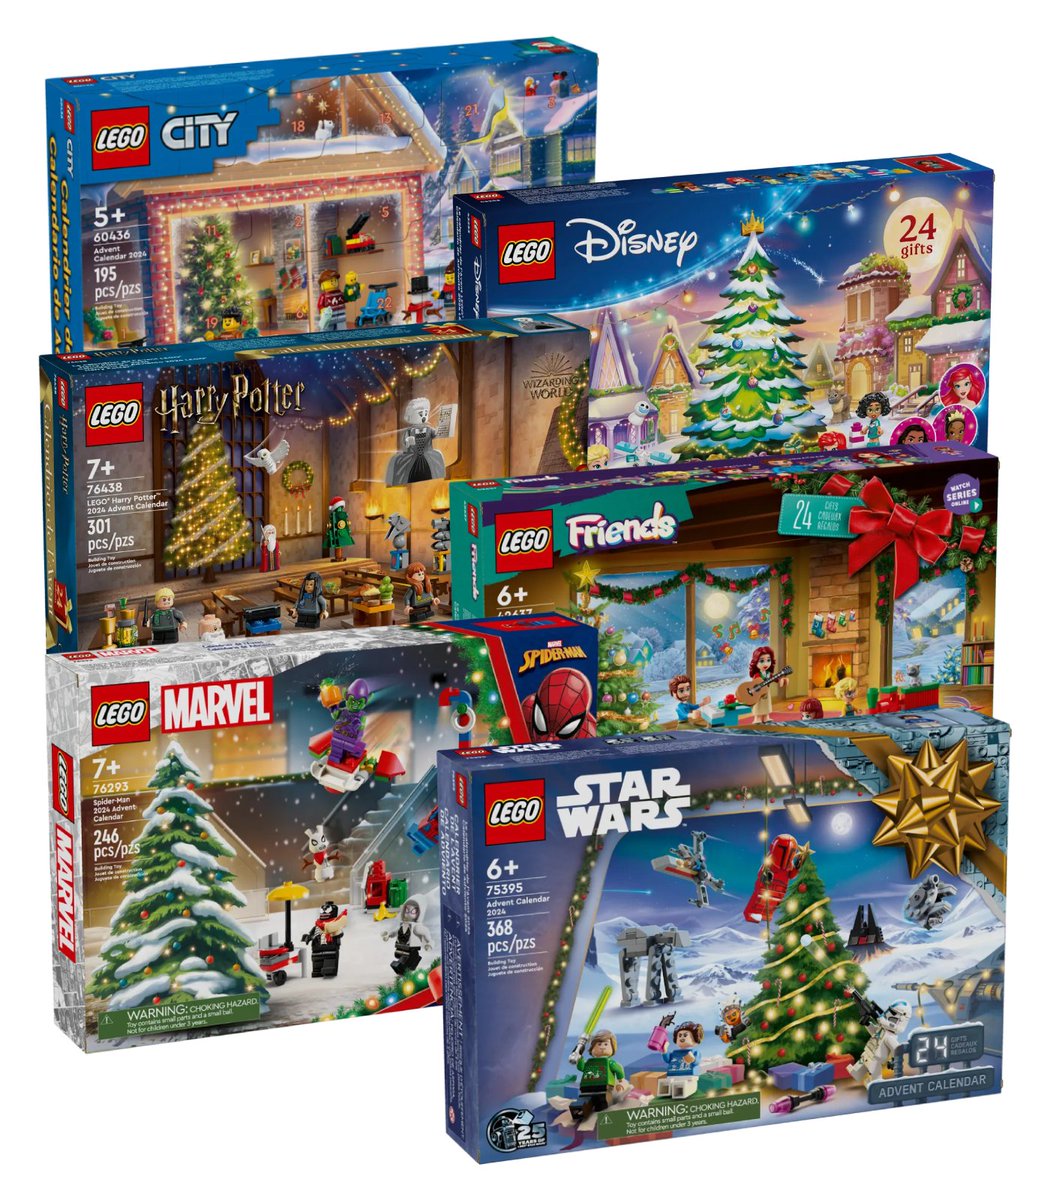 In LEGO Ninjago's lifetime, we have seen the total number of Advent Calendars rise from 2 to 6

...and none of them are LEGO Ninjago.
This is an issue that needs to be resolved!